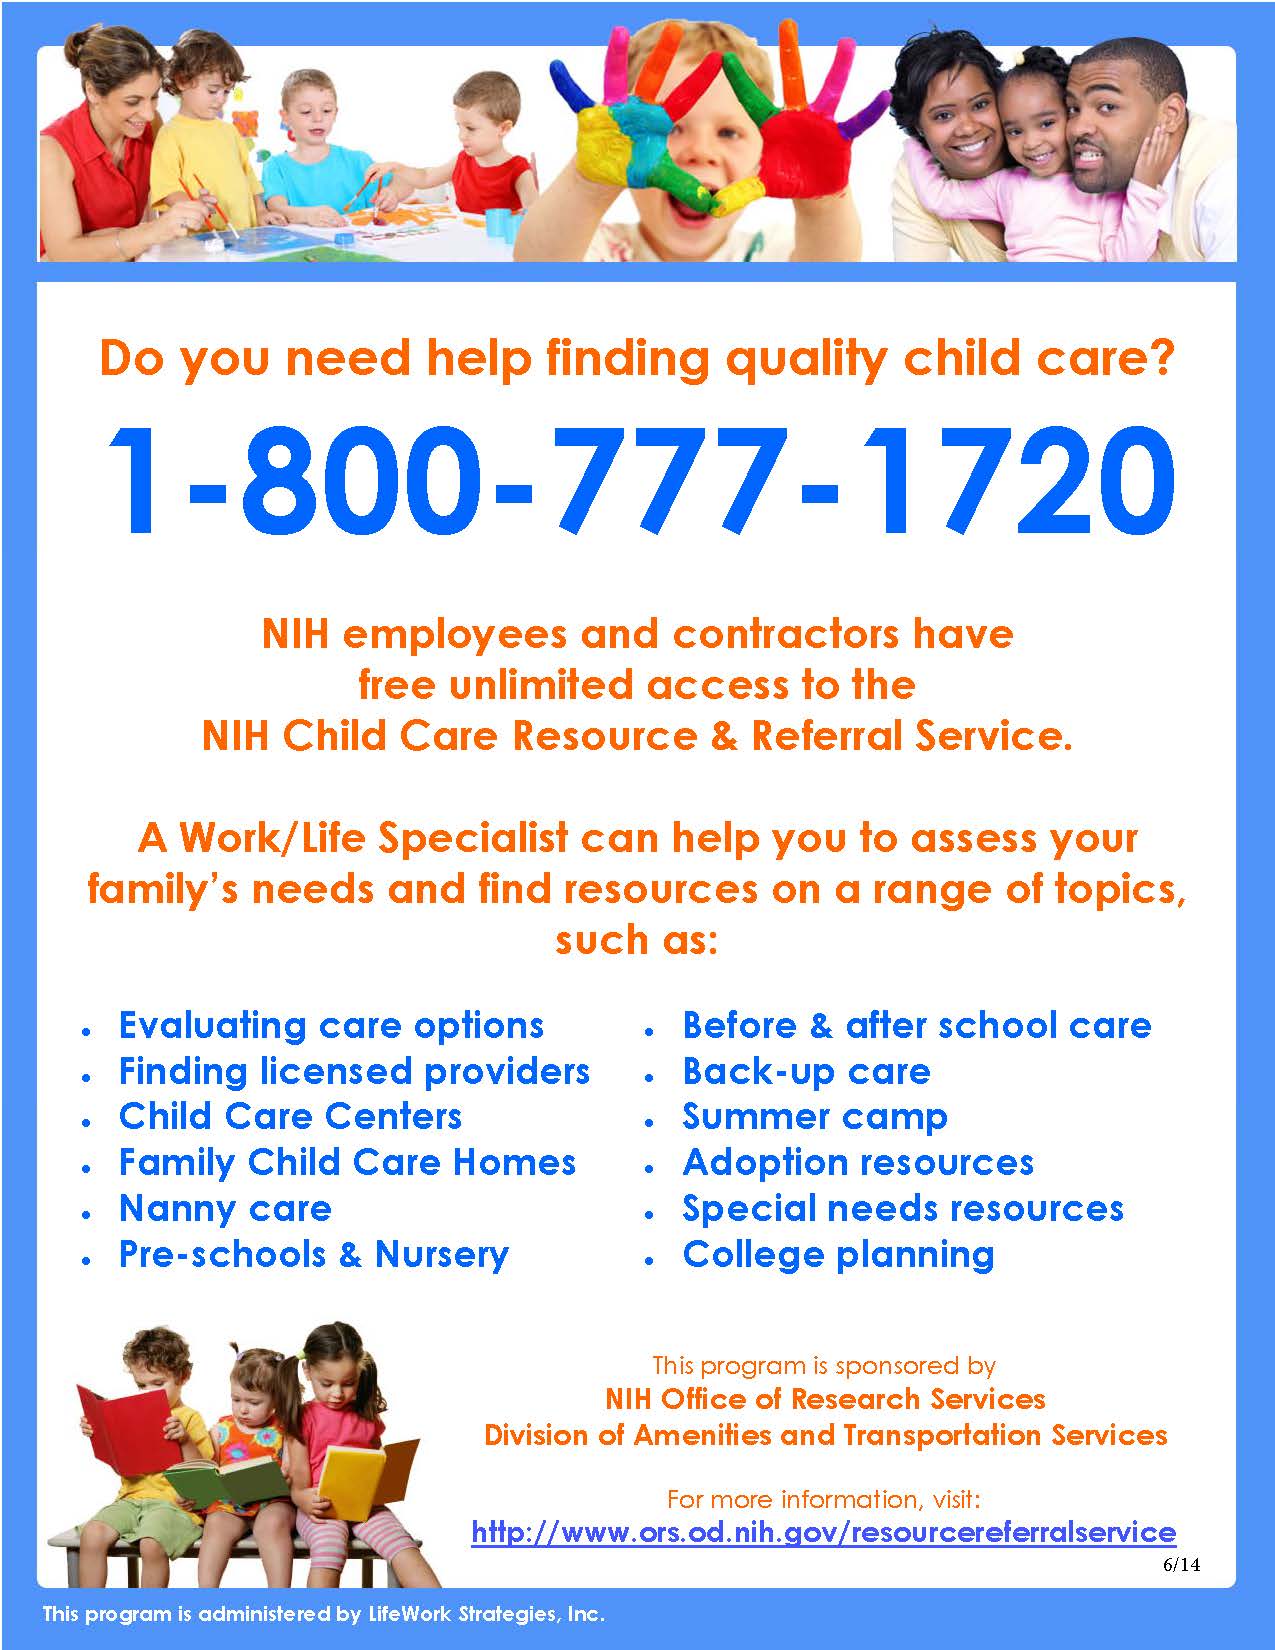 Quality Child Care Information